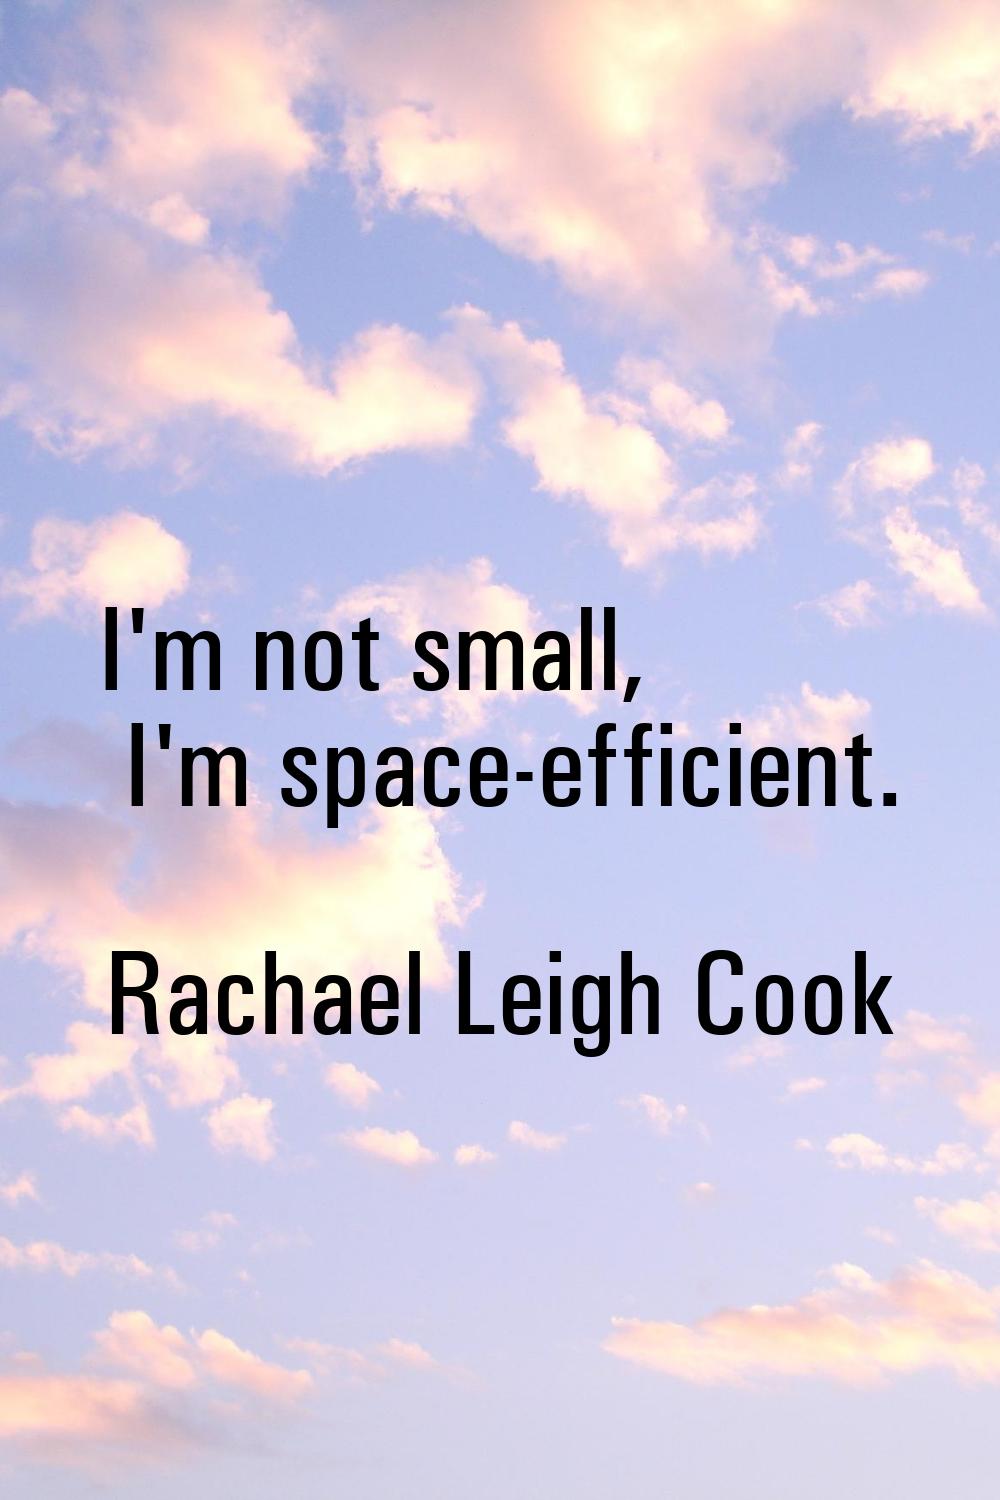 I'm not small, I'm space-efficient.